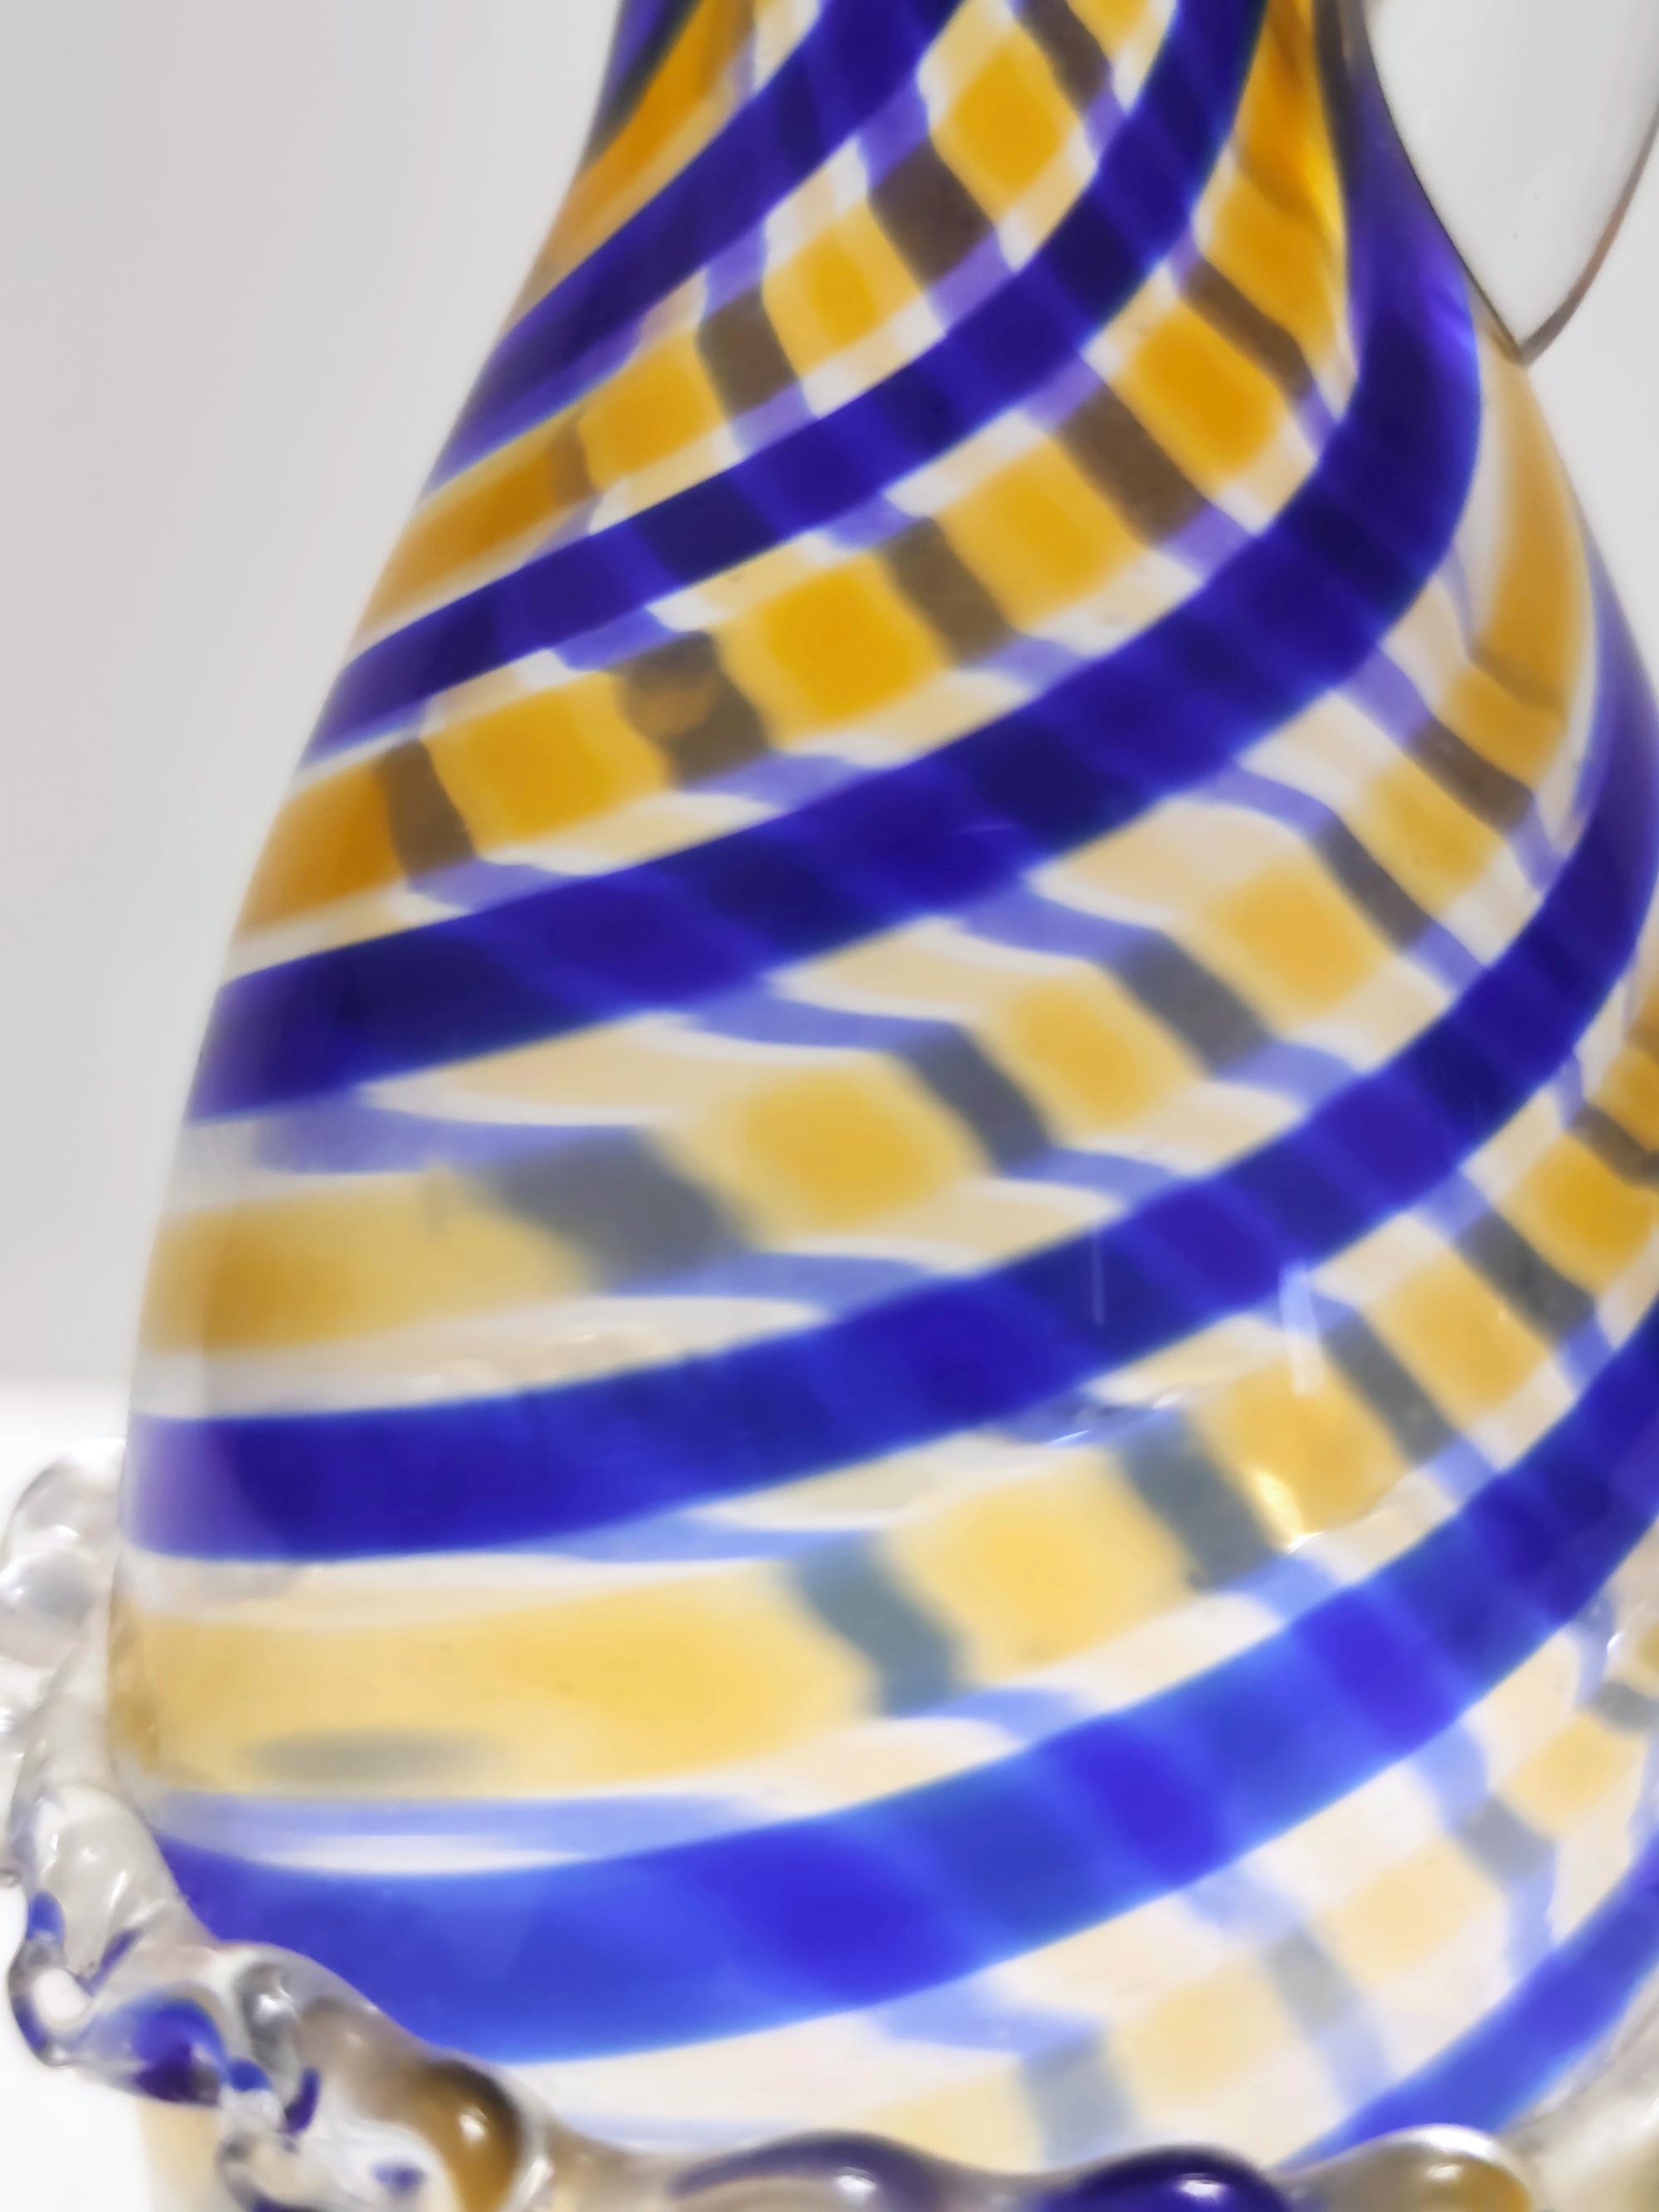 Mid-20th Century Murano Glass Pitcher Vase Ascribable to Toso with Blue and Yellow Canes For Sale